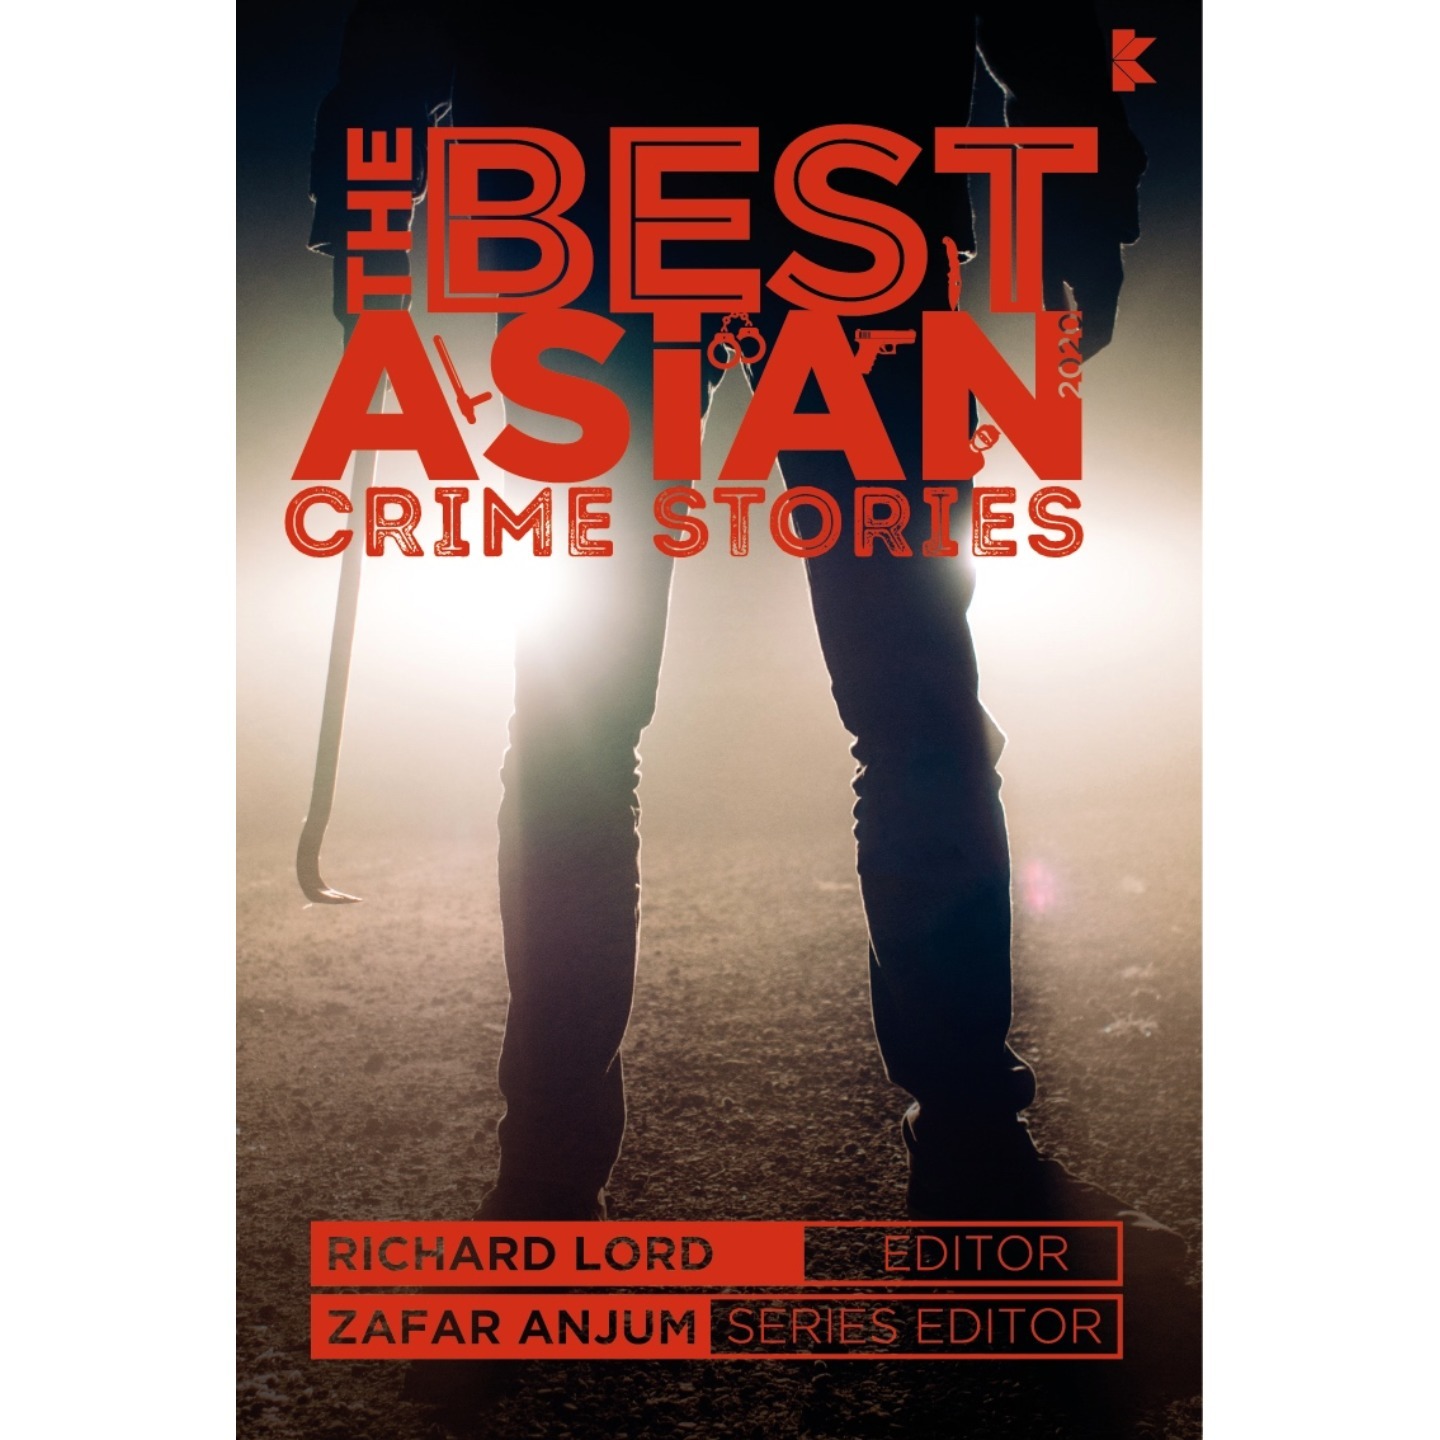 The Best Asian Crime Stories 2020